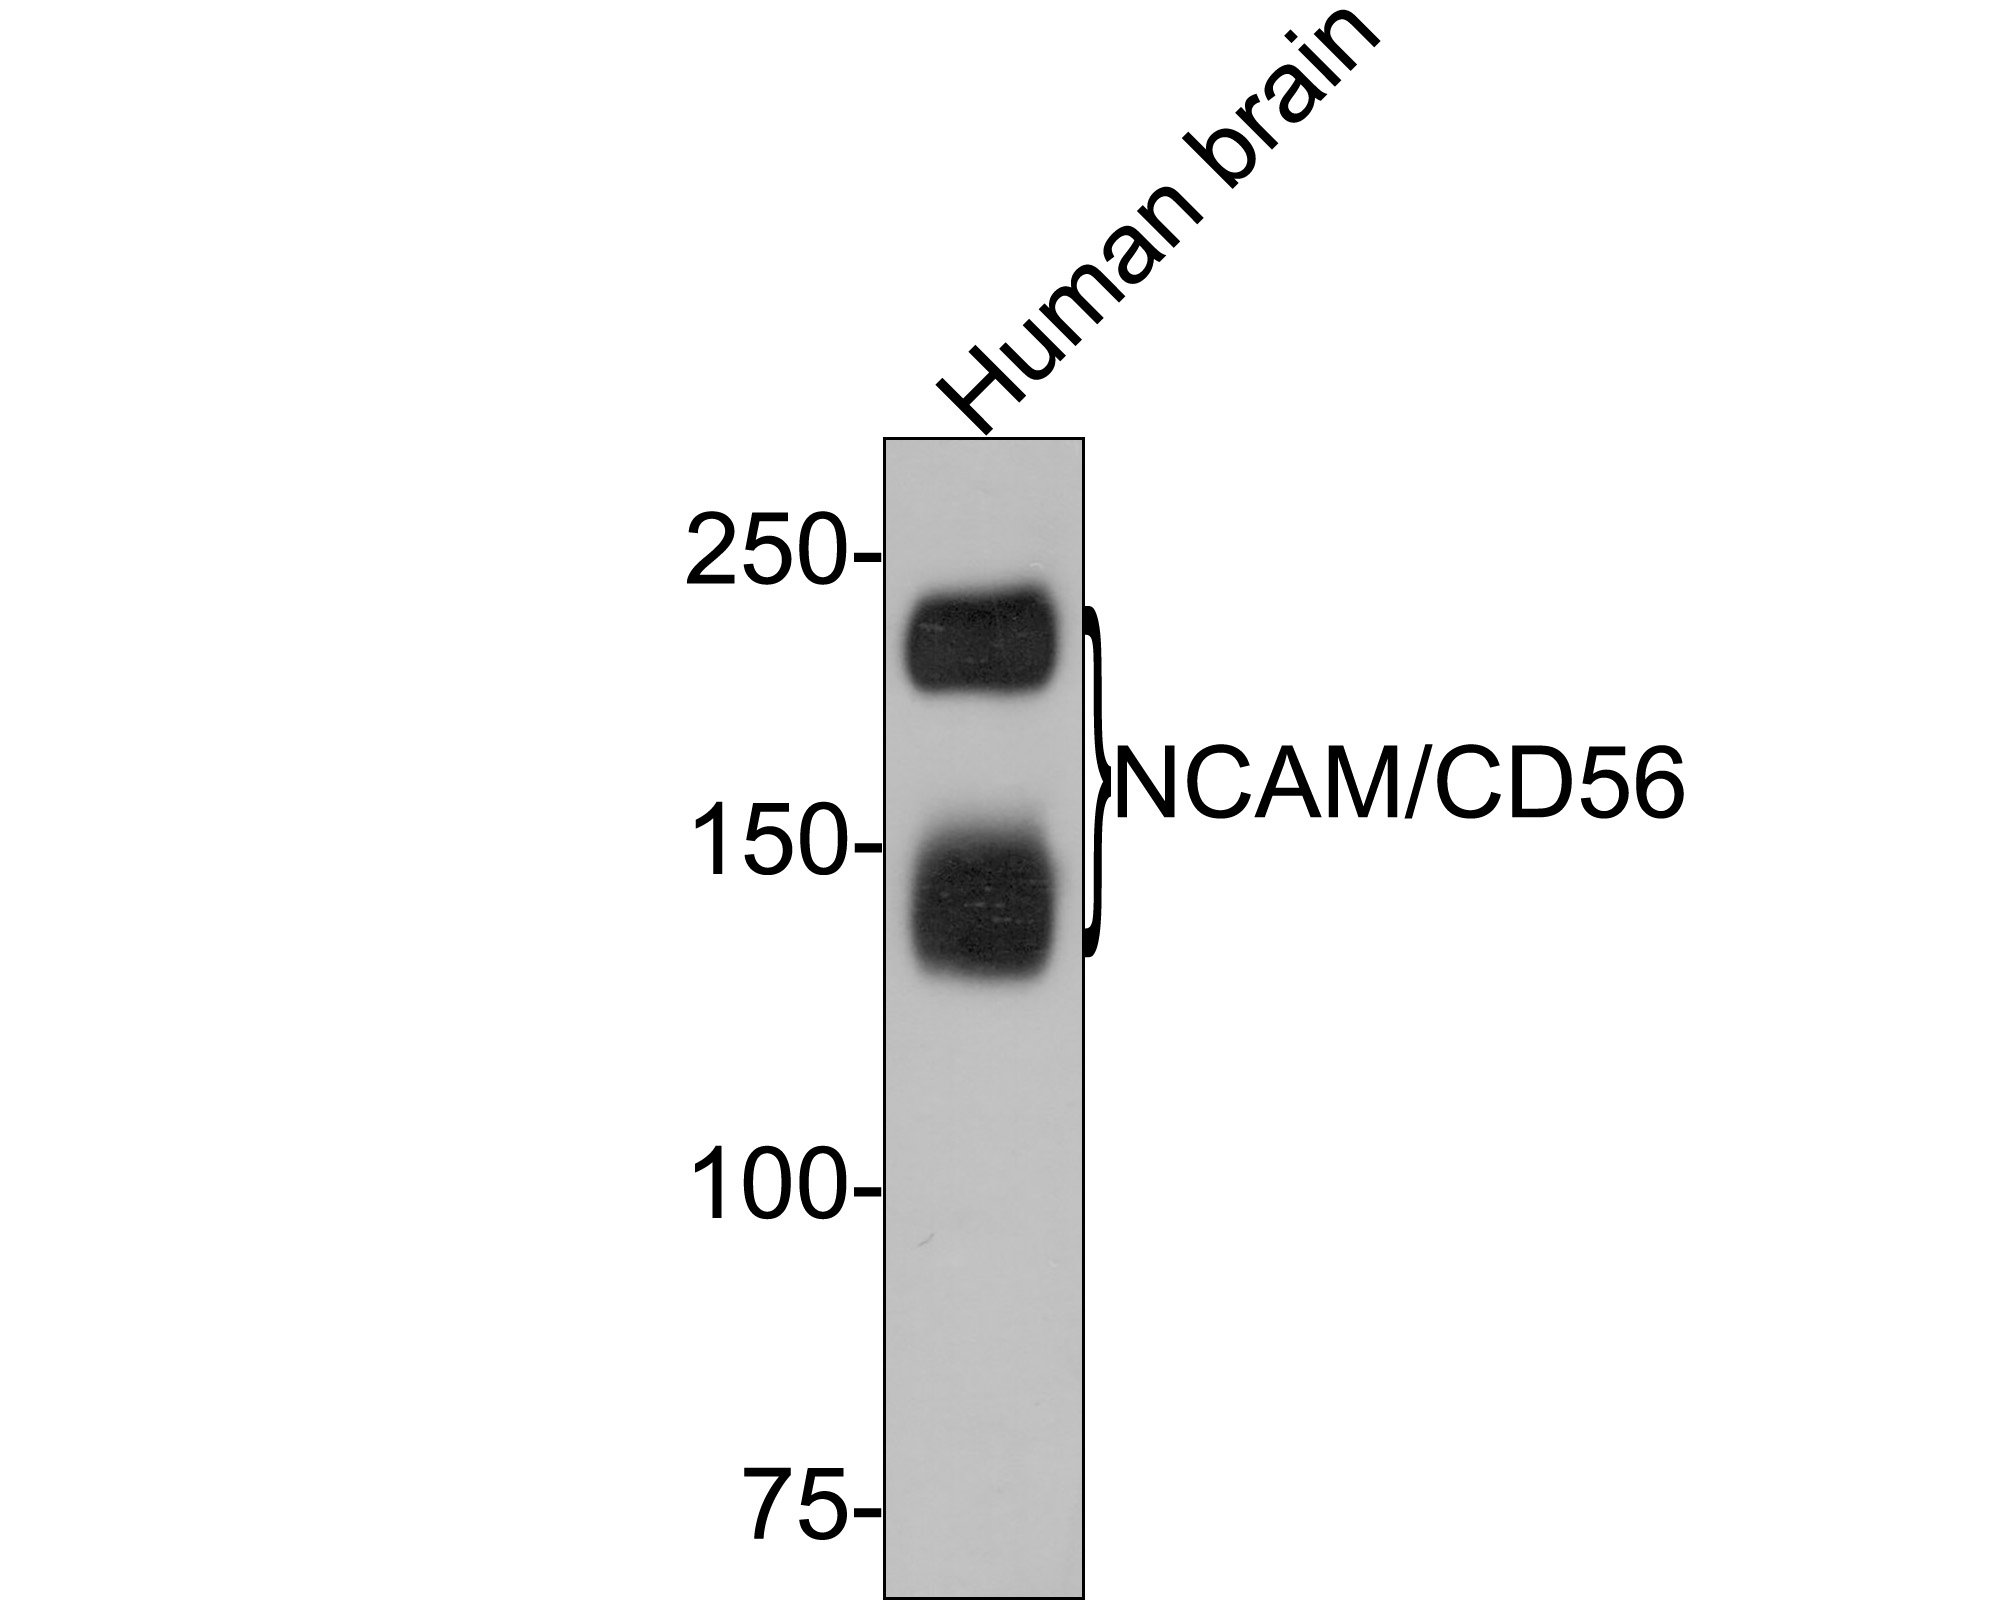 Western blot analysis of NCAM/CD56 on human brain tissue lysates with Rabbit anti-NCAM/CD56 antibody (ET1702-43) at 1/2,000 dilution.<br />
<br />
Lysates/proteins at 20 µg/Lane.<br />
<br />
Predicted band size: 95 kDa<br />
Observed band size: 140/180 kDa<br />
<br />
Exposure time: 30 seconds;<br />
<br />
6% SDS-PAGE gel.<br />
<br />
Proteins were transferred to a PVDF membrane and blocked with 5% NFDM/TBST for 1 hour at room temperature. The primary antibody (ET1702-43) at 1/2,000 dilution was used in 5% NFDM/TBST at room temperature for 2 hours. Goat Anti-Rabbit IgG - HRP Secondary Antibody (HA1001) at 1:300,000 dilution was used for 1 hour at room temperature.